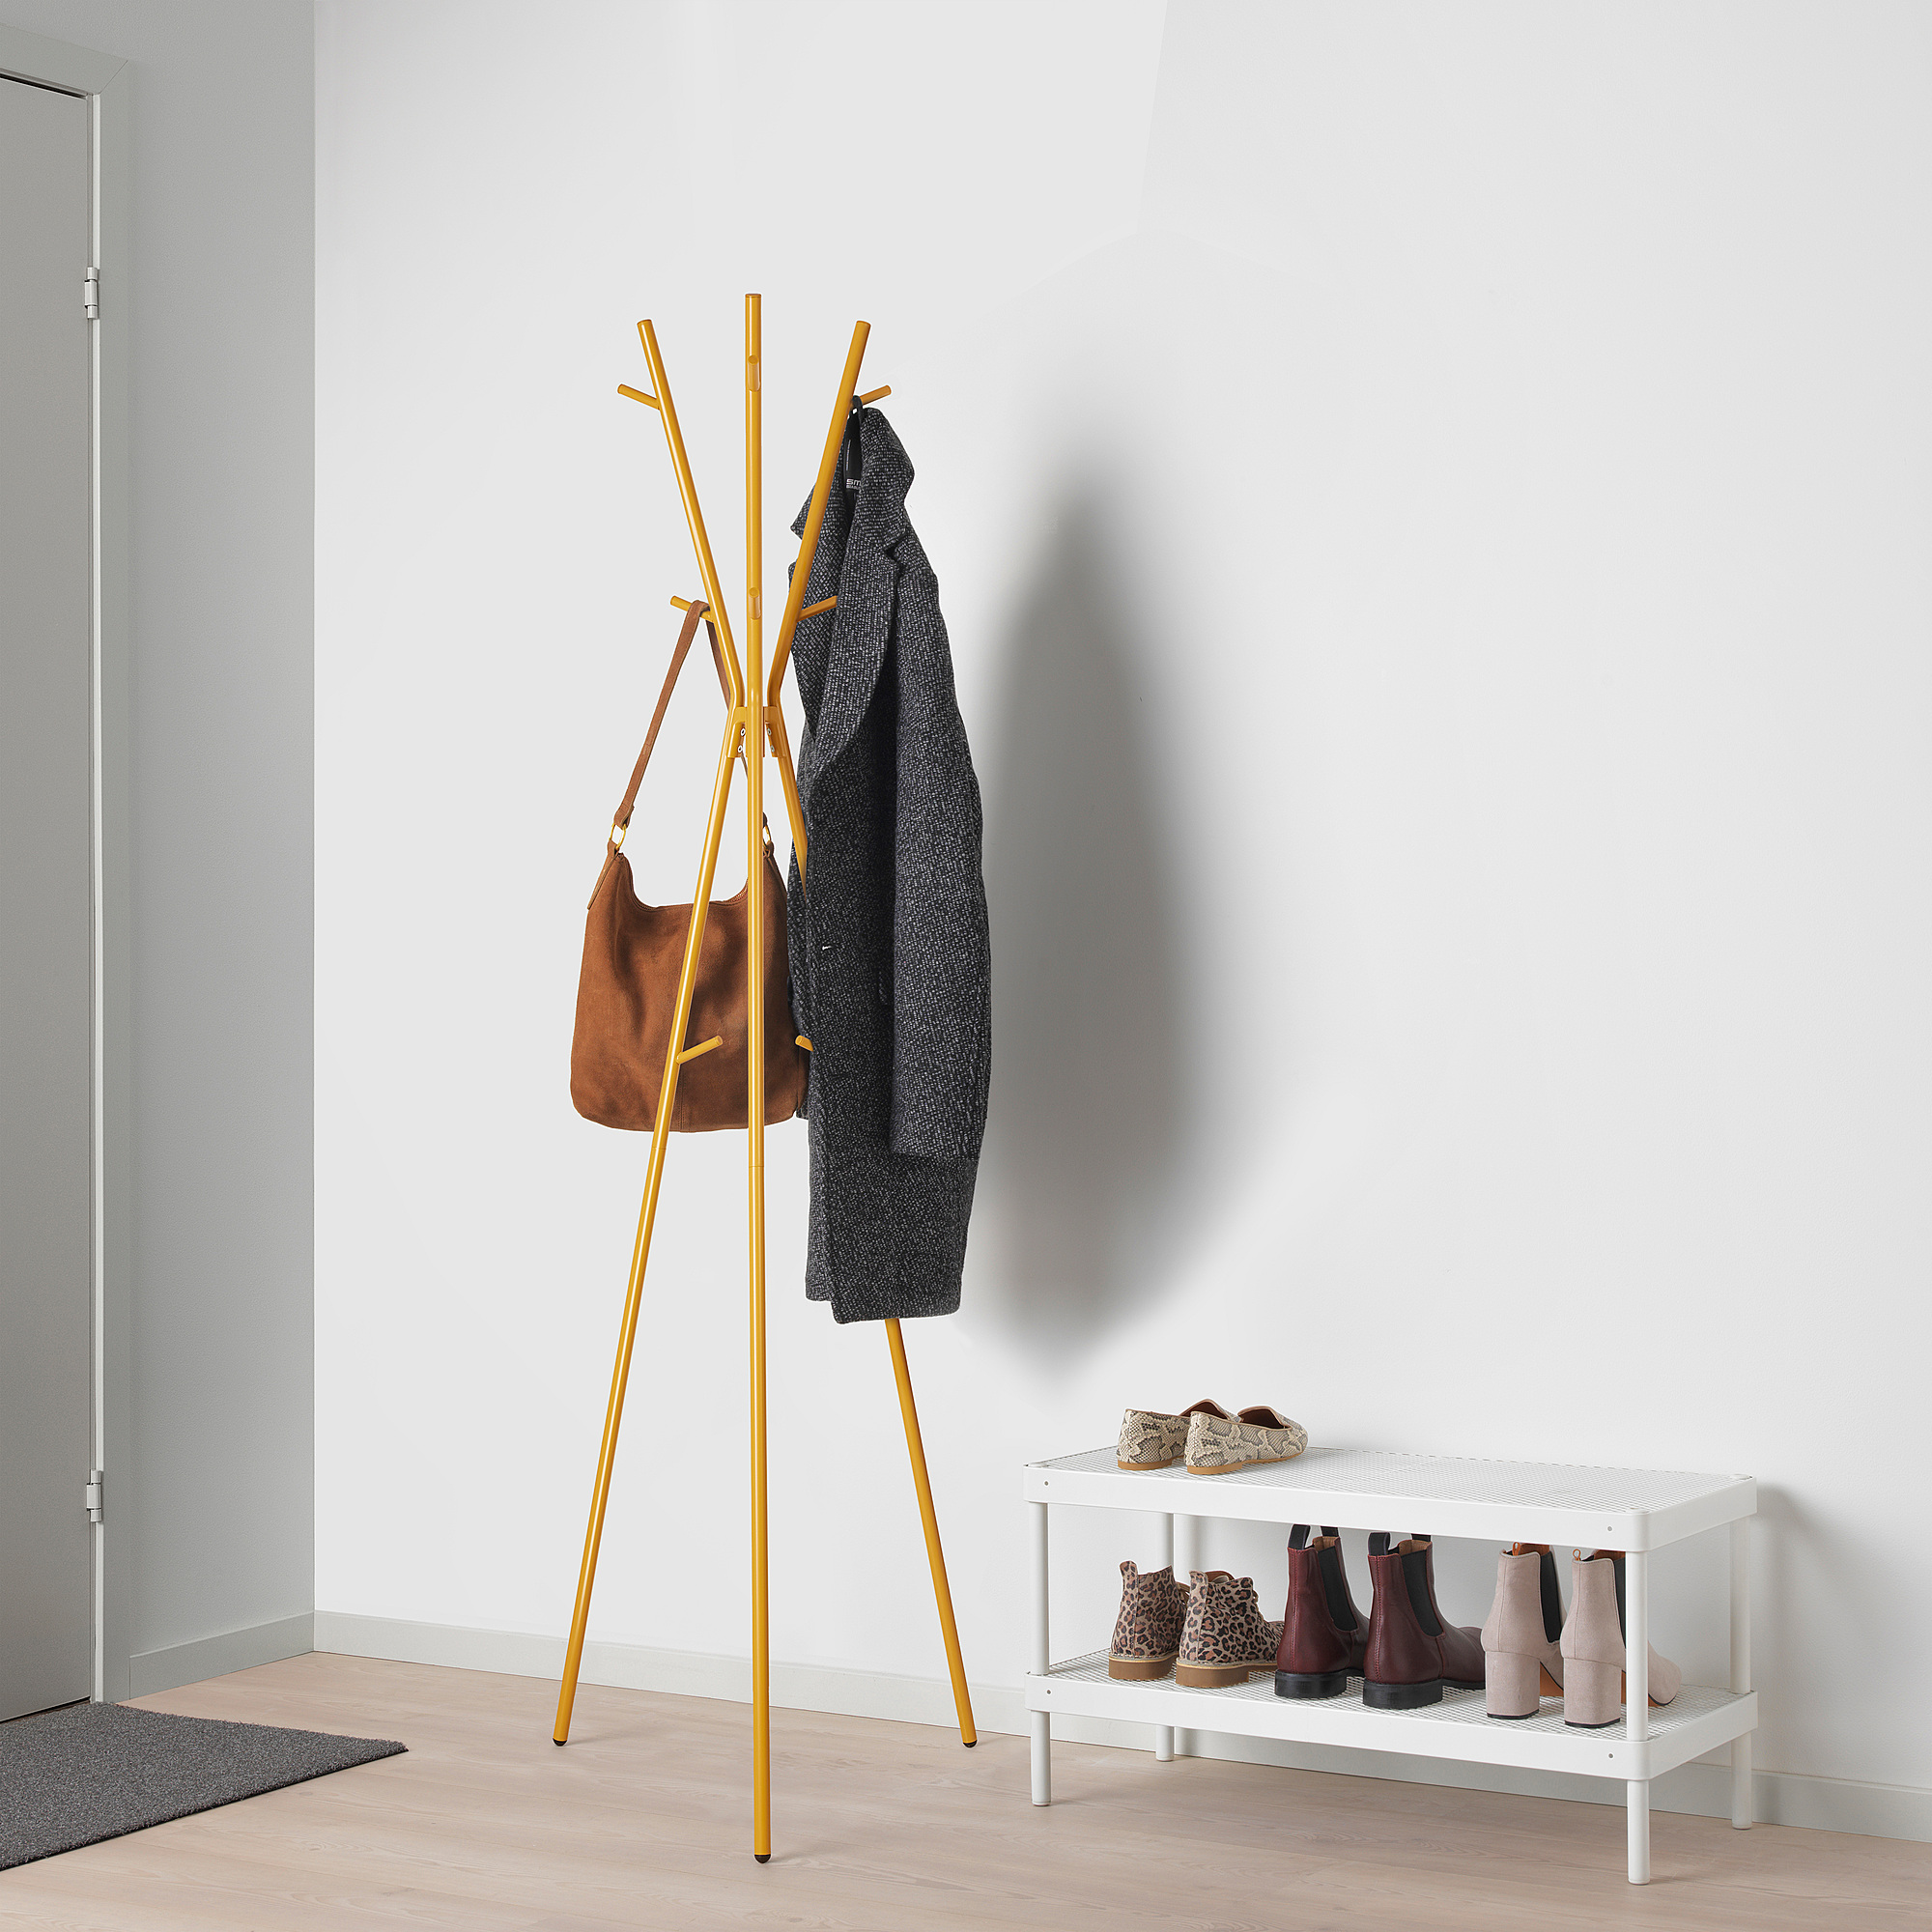 EKRAR hat and coat stand